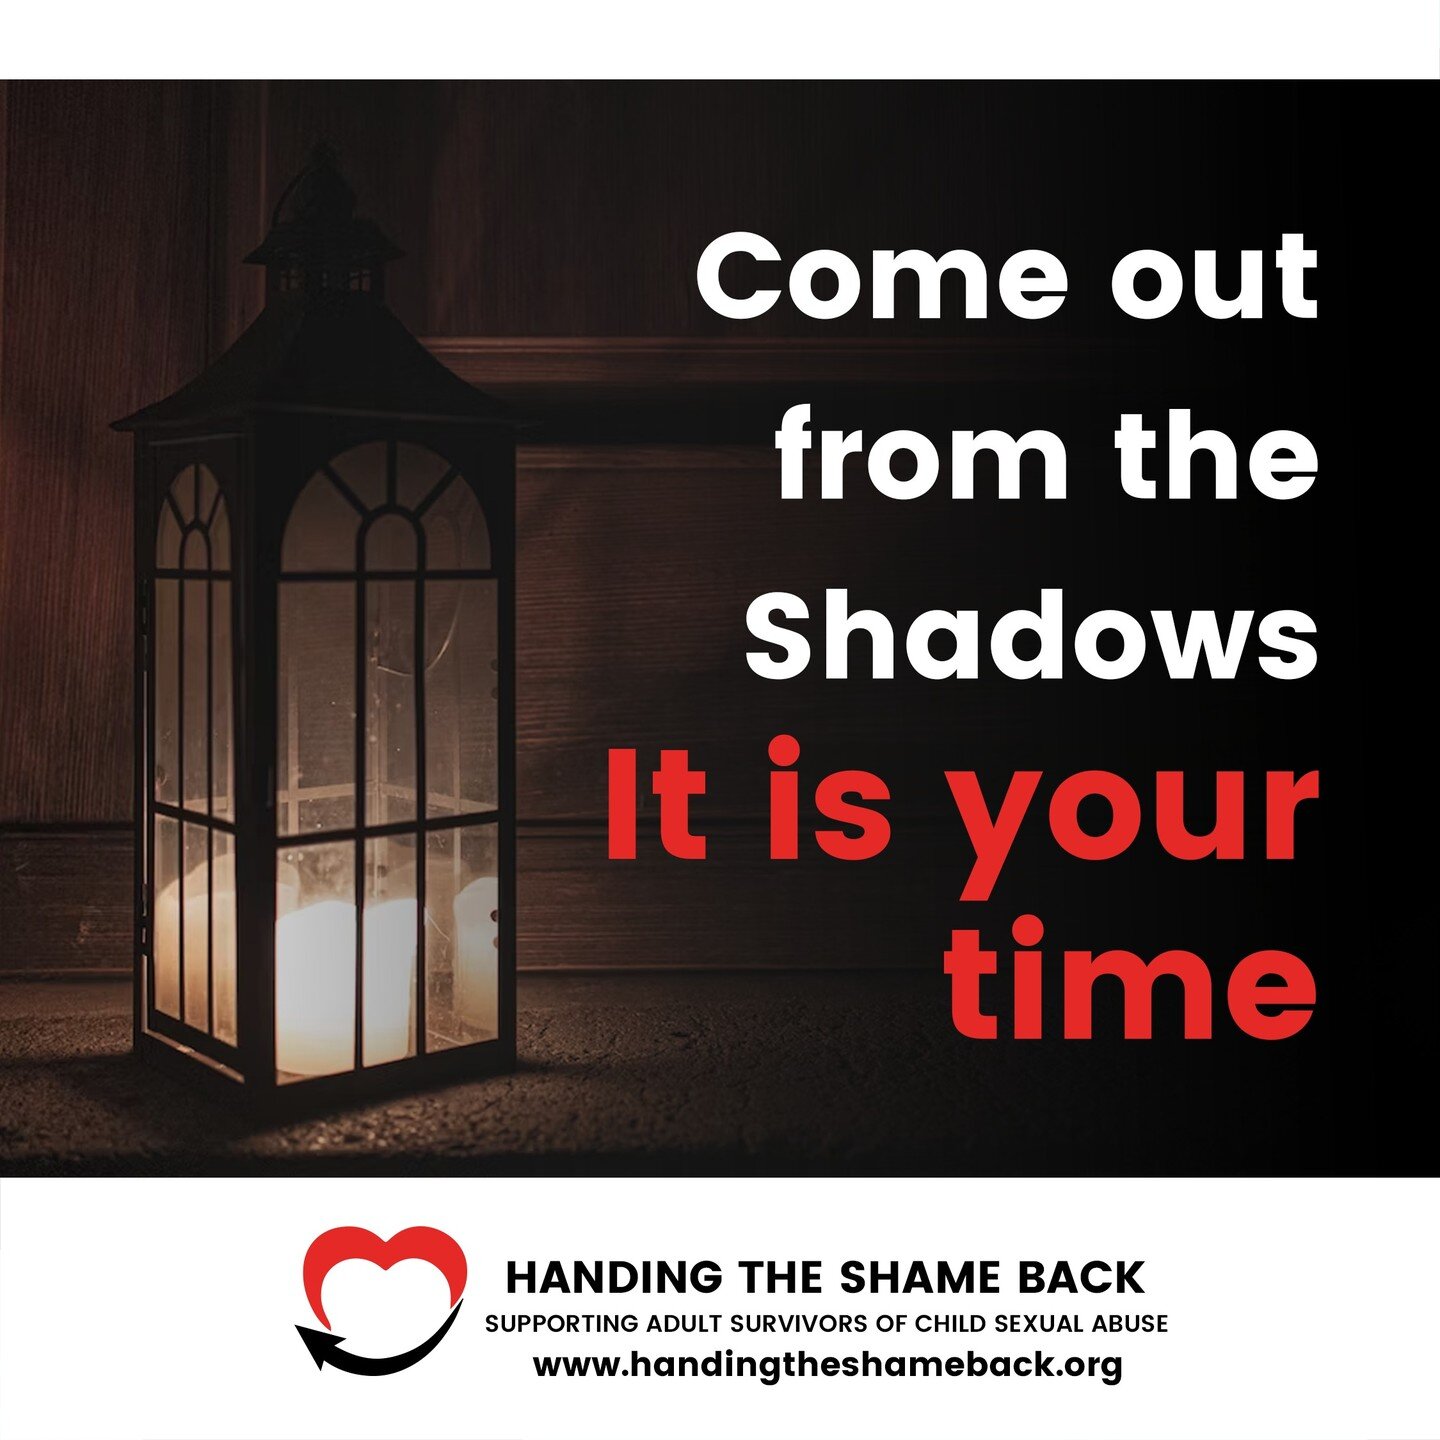 We Honour You!
Handing the Shame Back stands by all Survivors as they come out of the shadows! Whether this means you tell a trusted person, or you share with a therapist, you are not alone! ❤️
Sign up to our website and get access to some of the mos